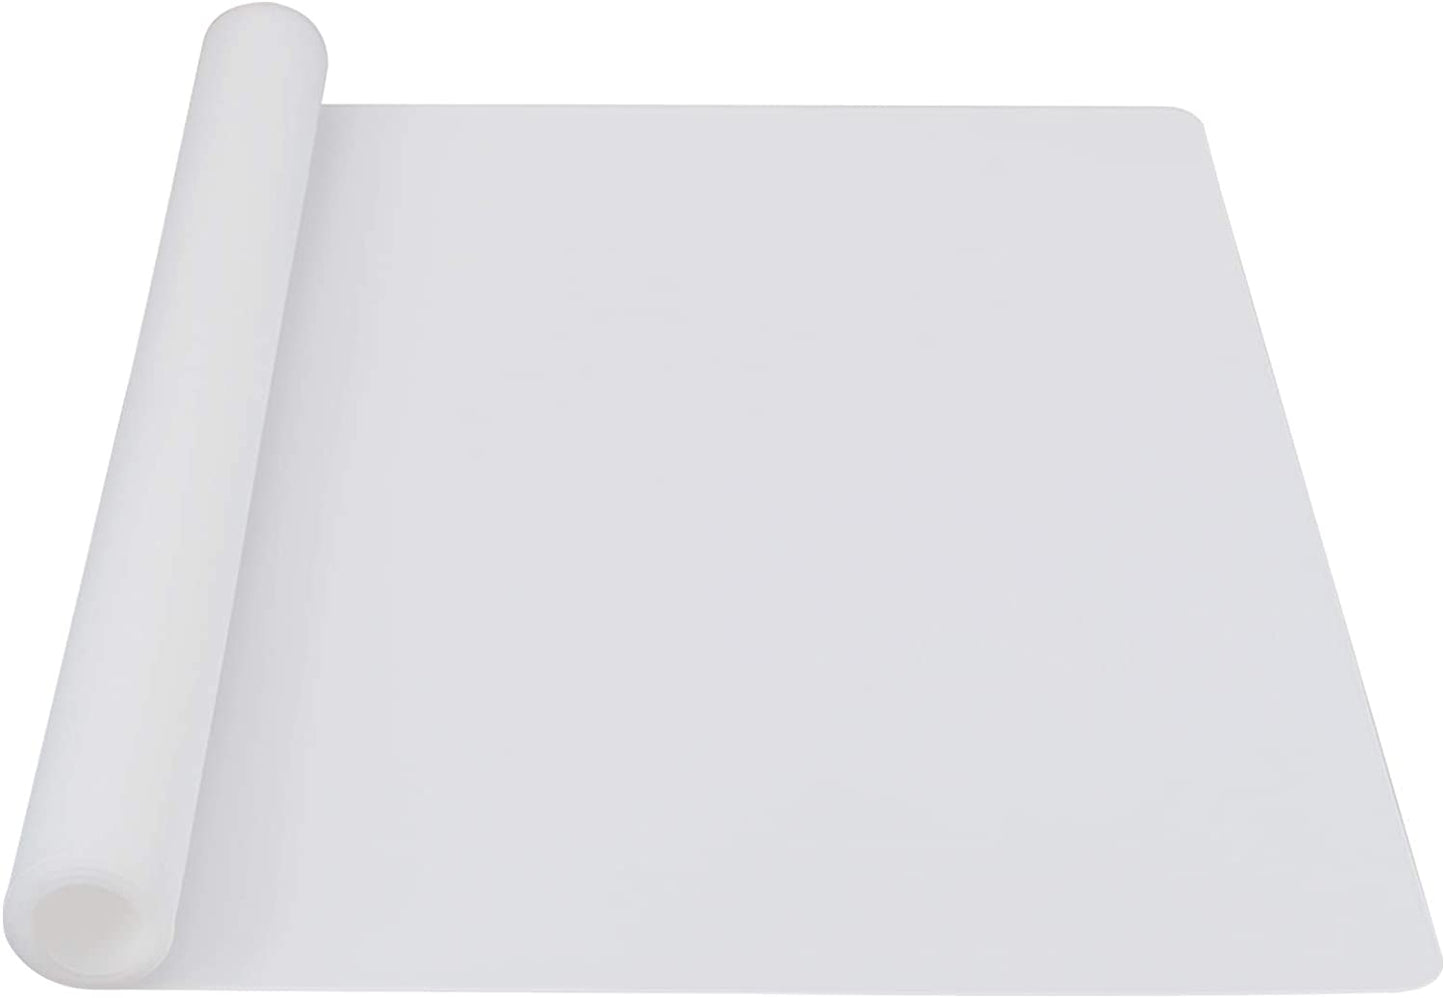 Webake 23.6" x 15.7" nonstick heat resistant silicone counter top protector clear desk mat (White)